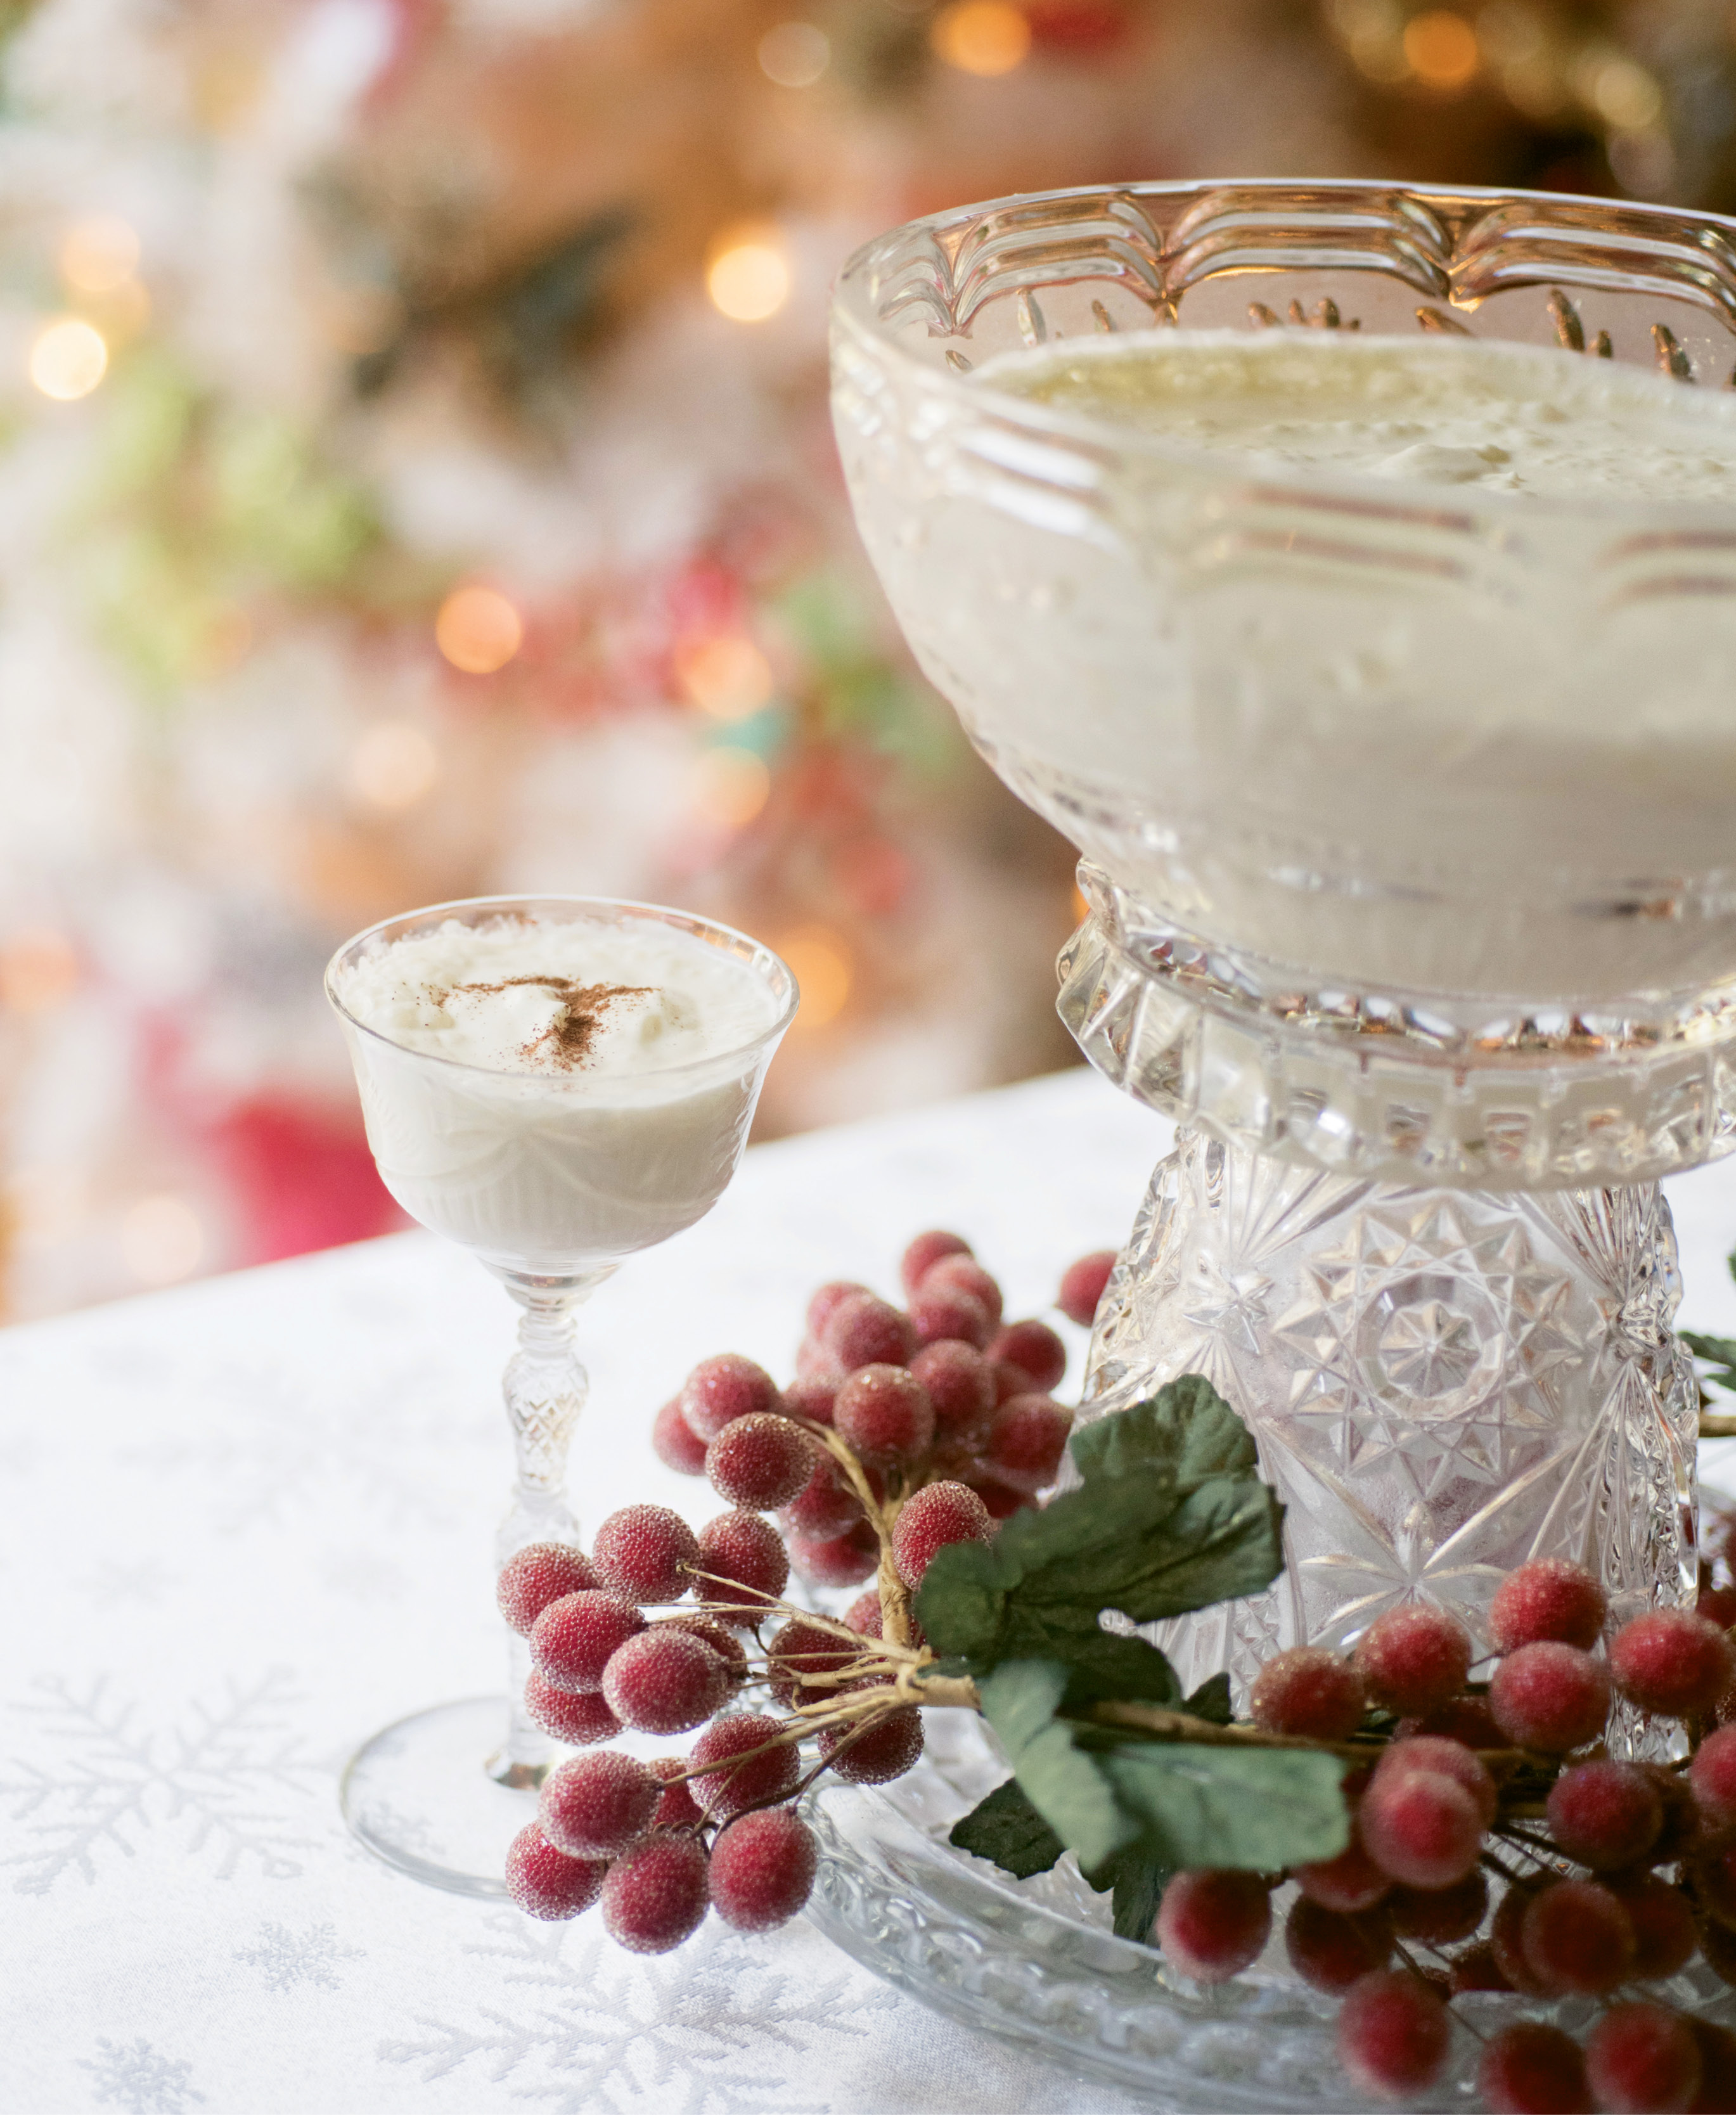 Traditionally, syllabub is made in a churn, but an emulsion blender makes a fine substitute.